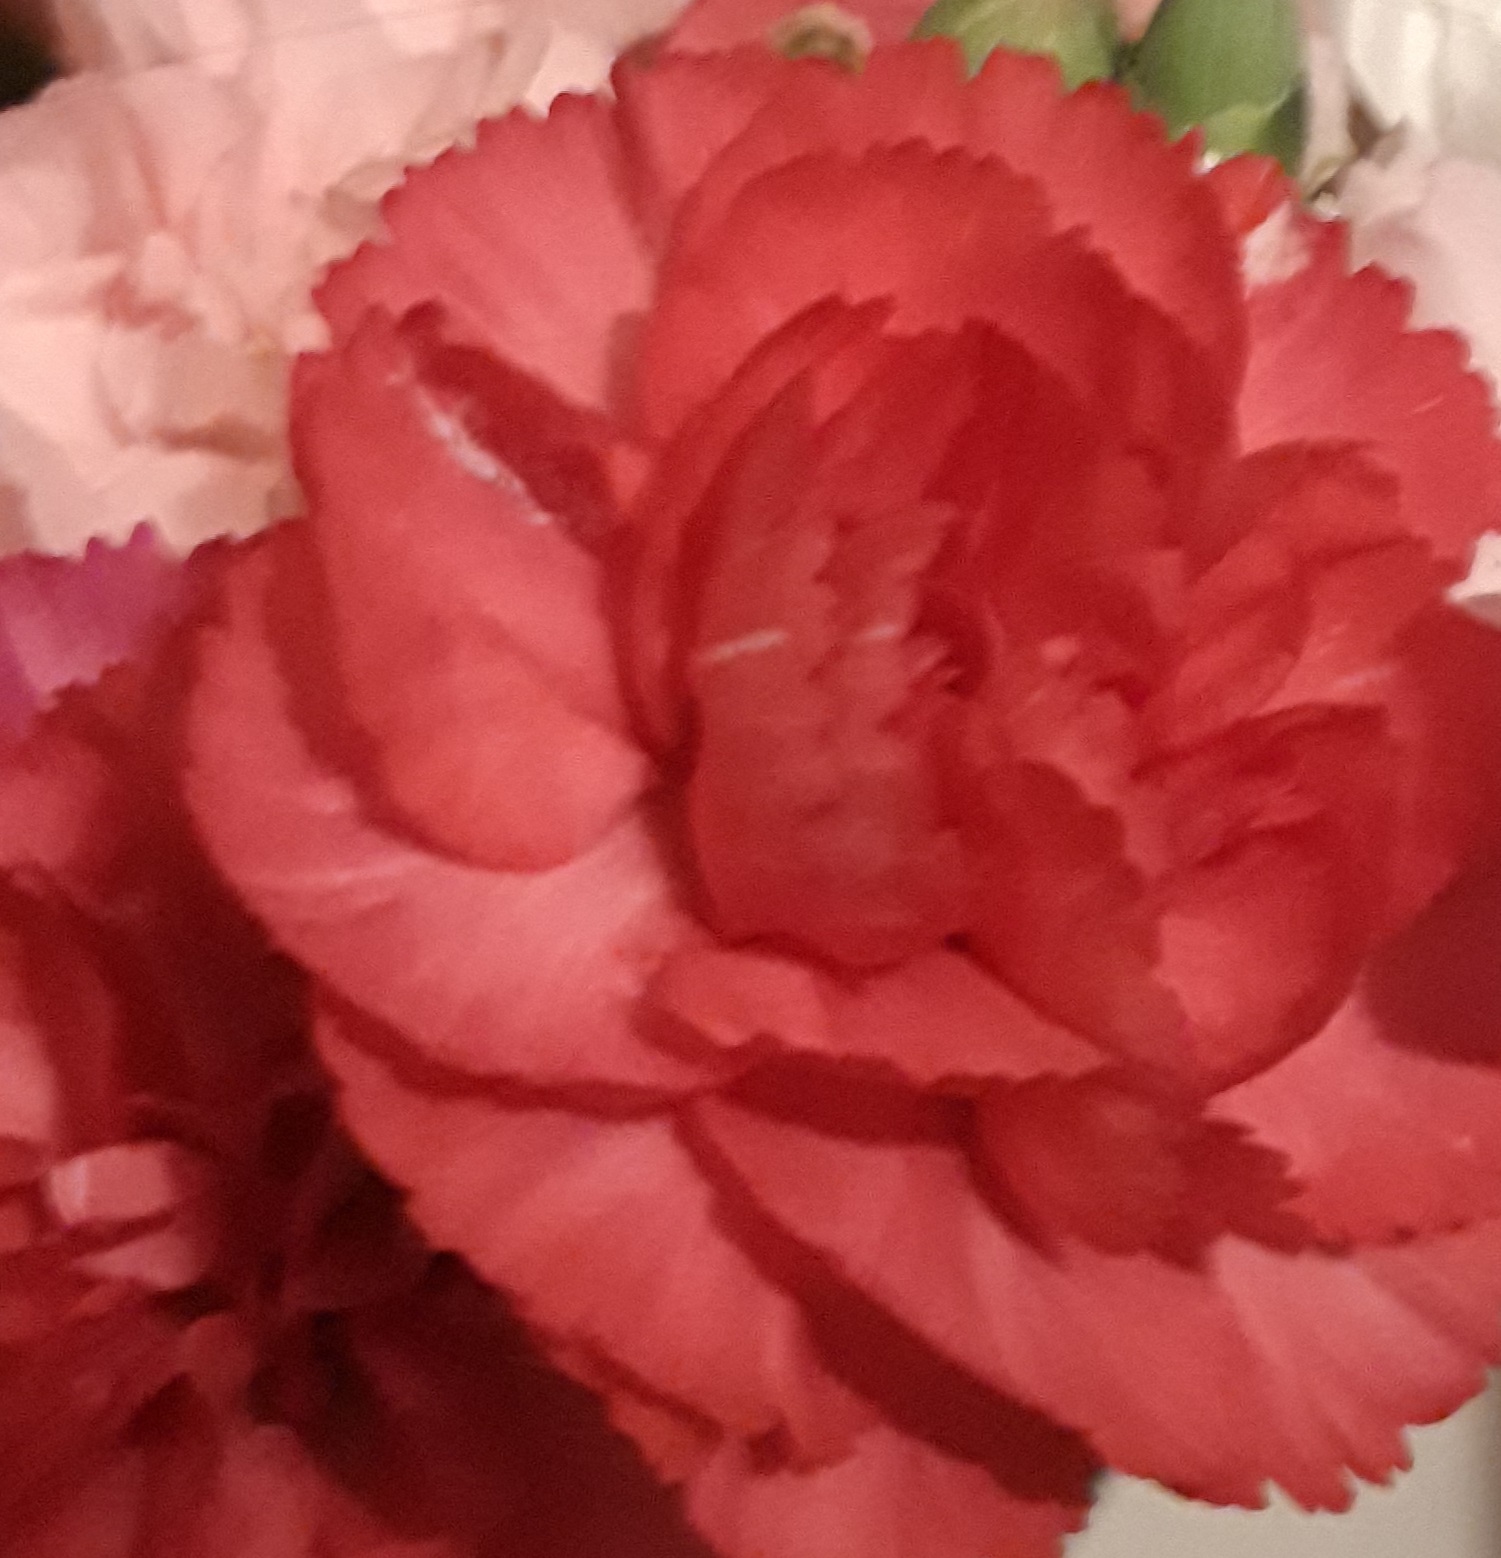 Red and pink carnations